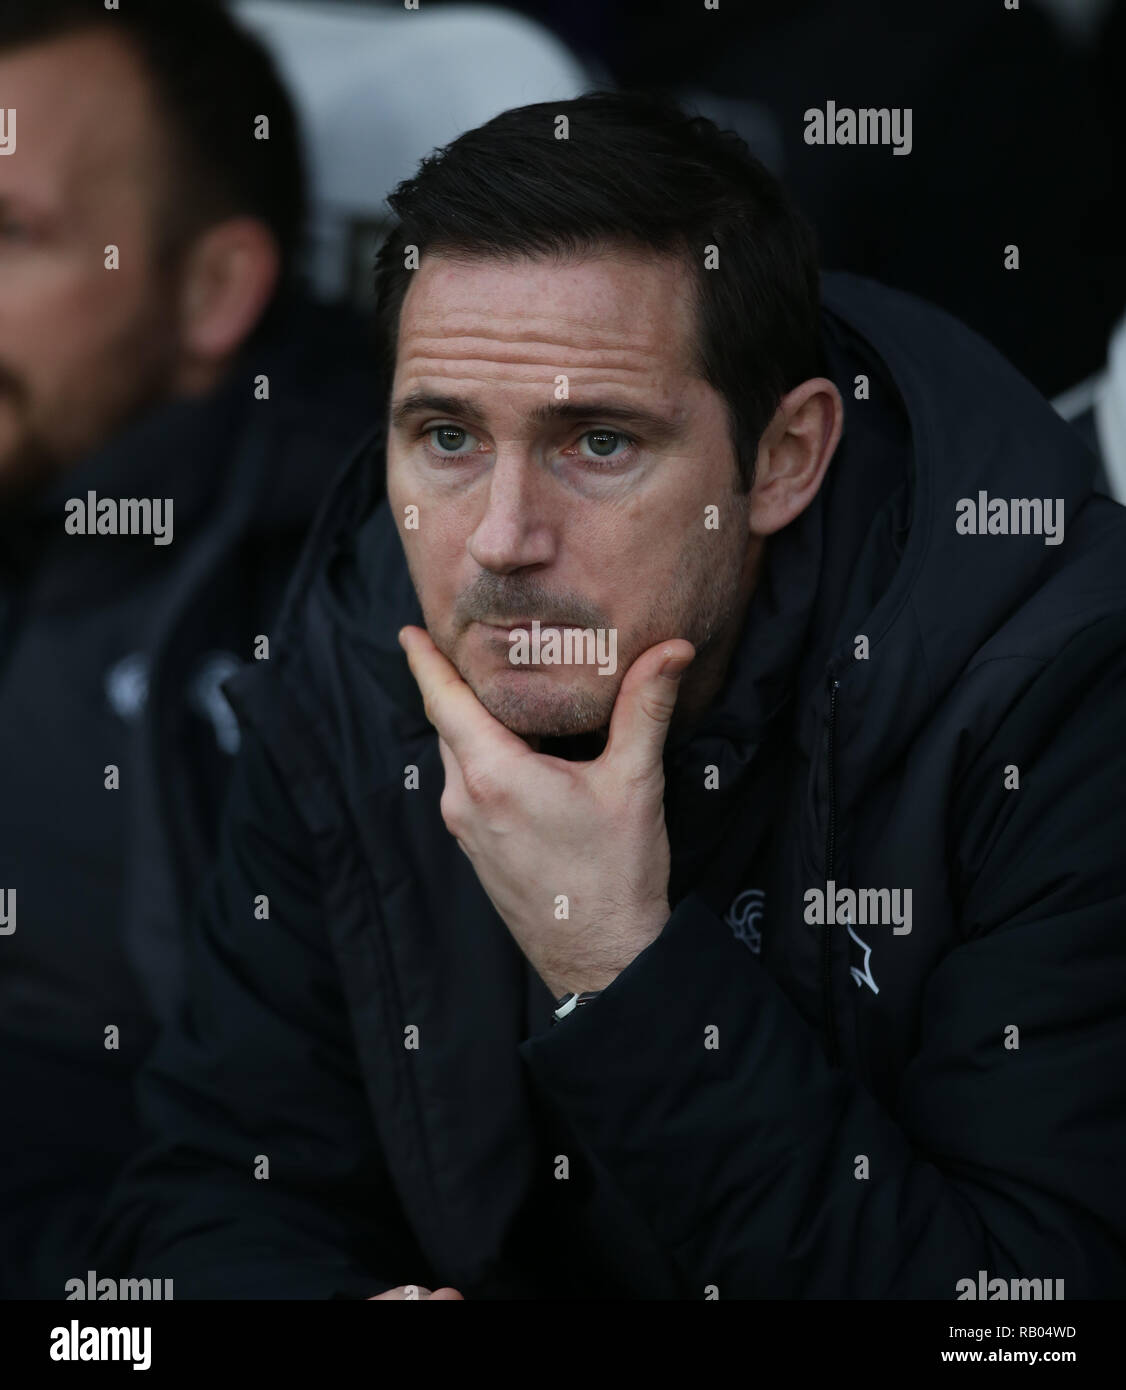 FRANK LAMPARD, DERBY COUNTY MANAGER, DERBY COUNTY V SOUTHAMPTON, die Emirate FA Cup 3. Runde, 2019 Stockfoto